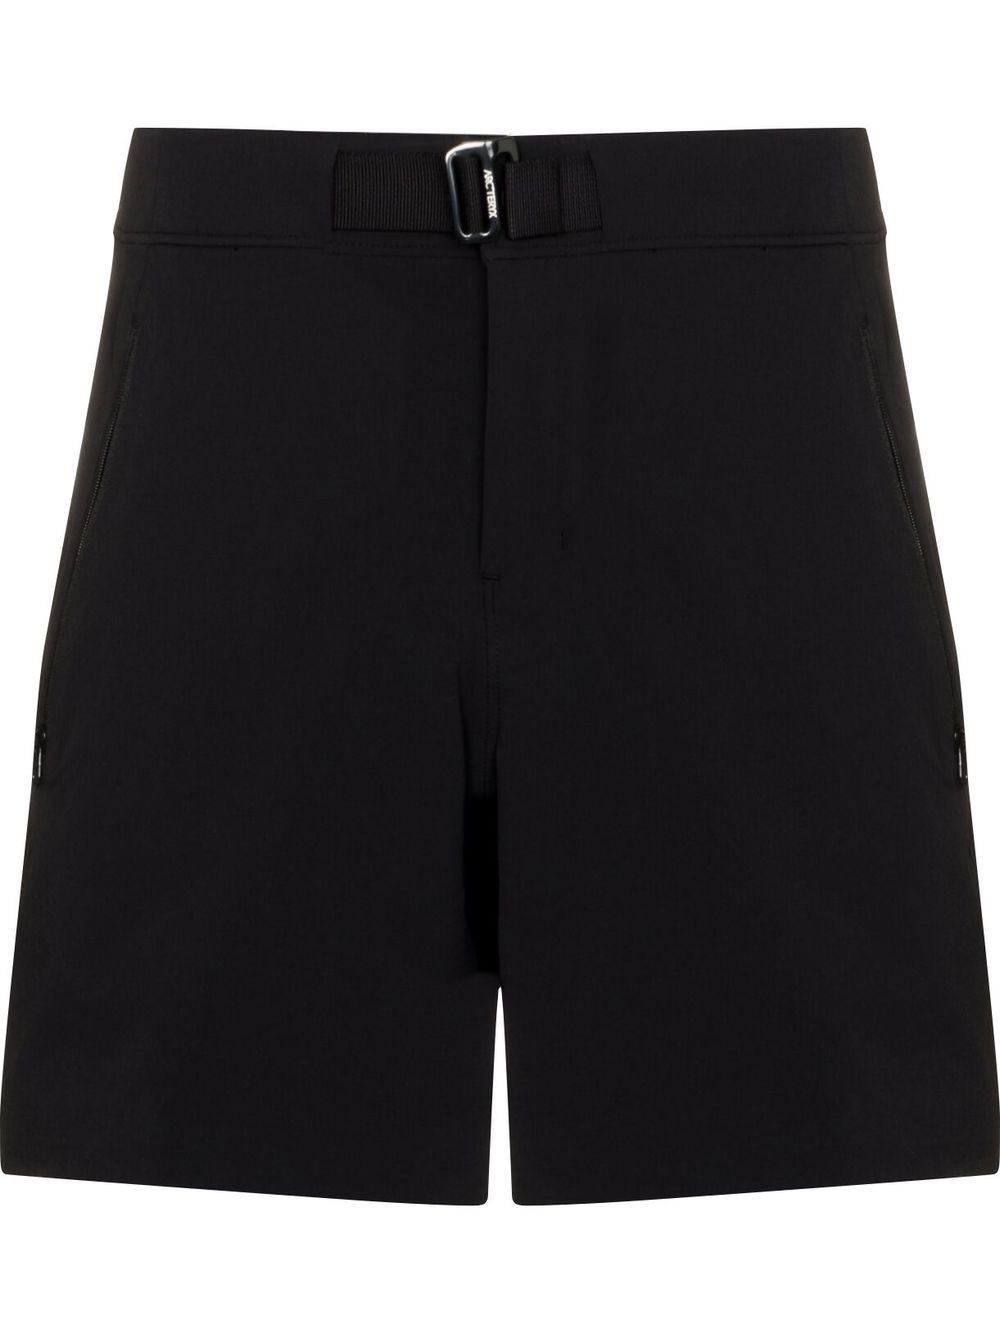 Arc'teryx belted performance shorts